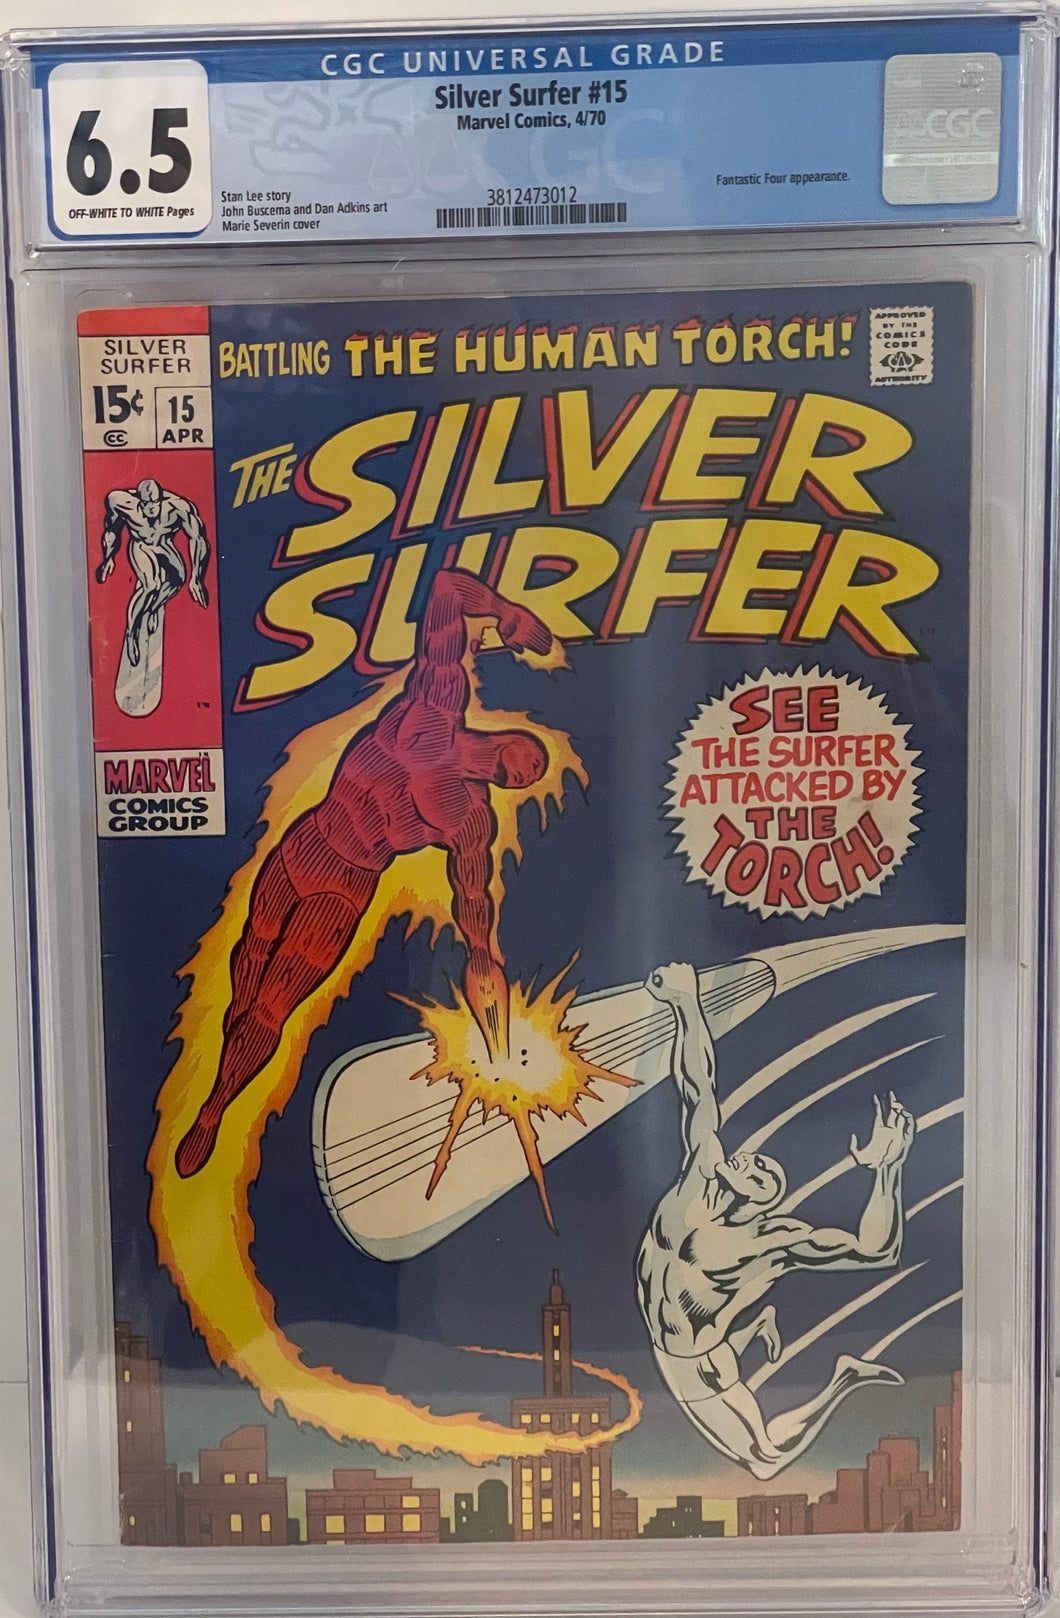 The Silver Surfer #15 6.5 CGC